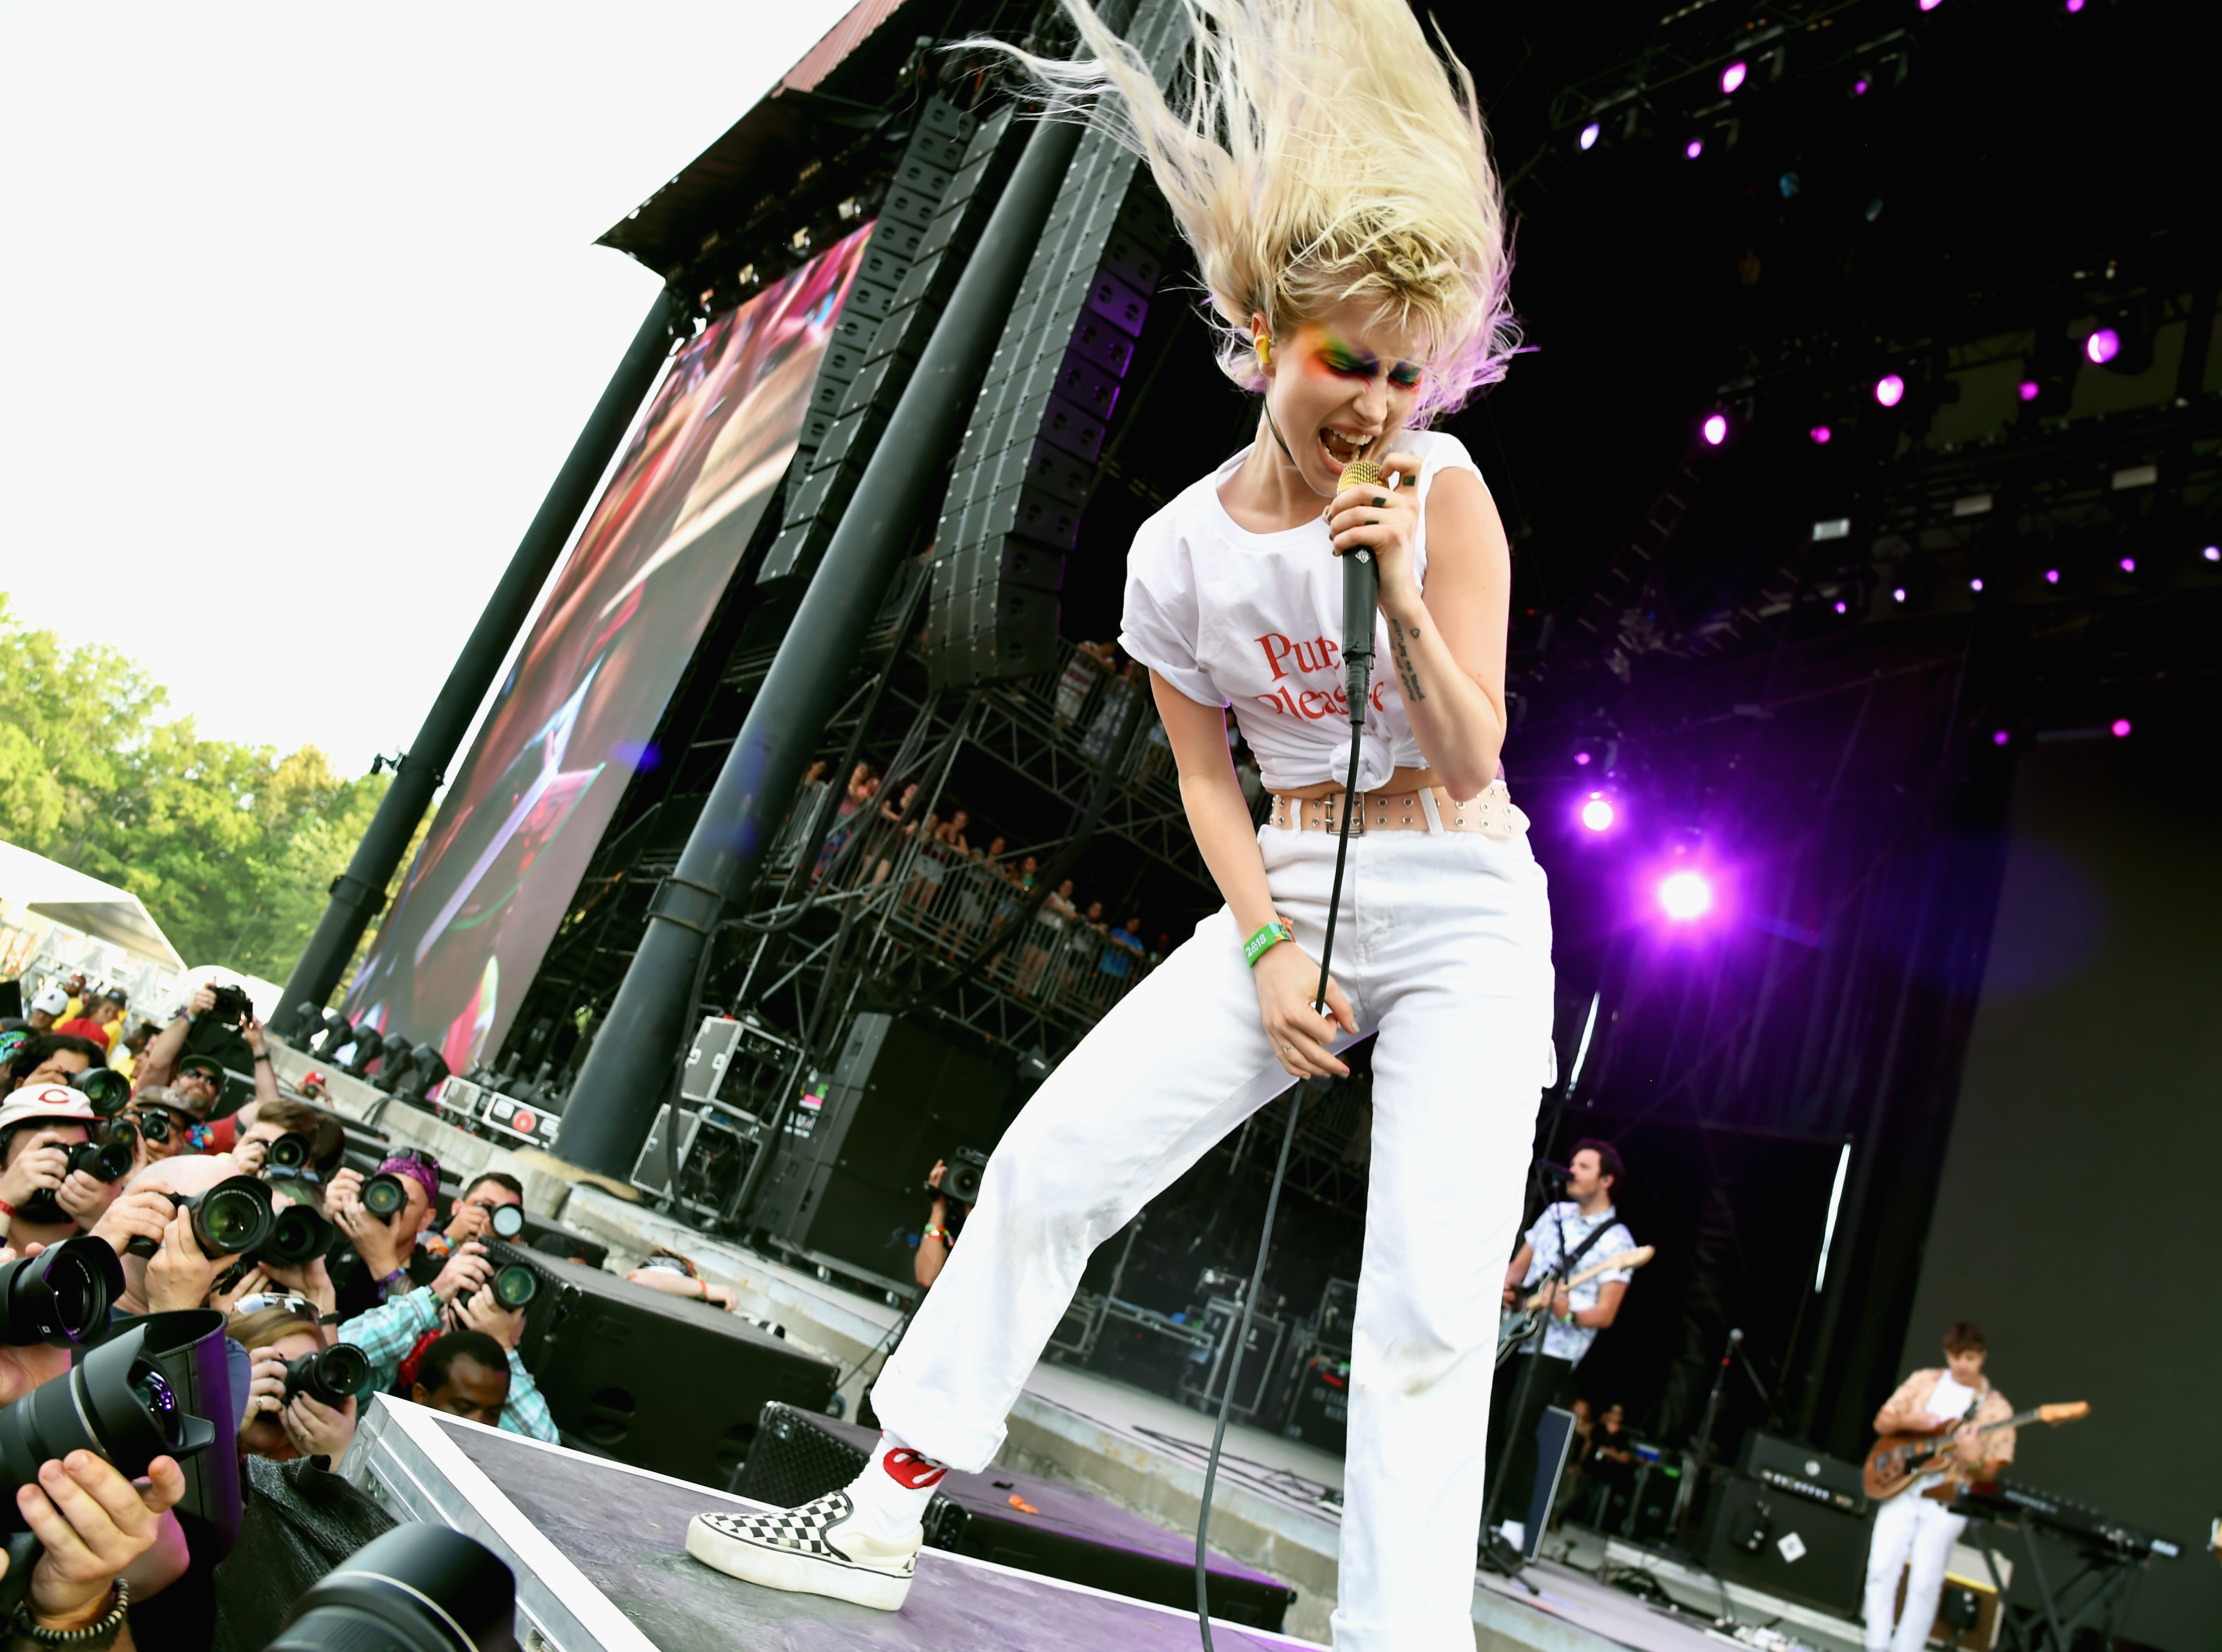 Hayley Williams of Paramore performs on What Stage during day 2 of the 2018 Bonnaroo Arts And Music Festival dressed in white